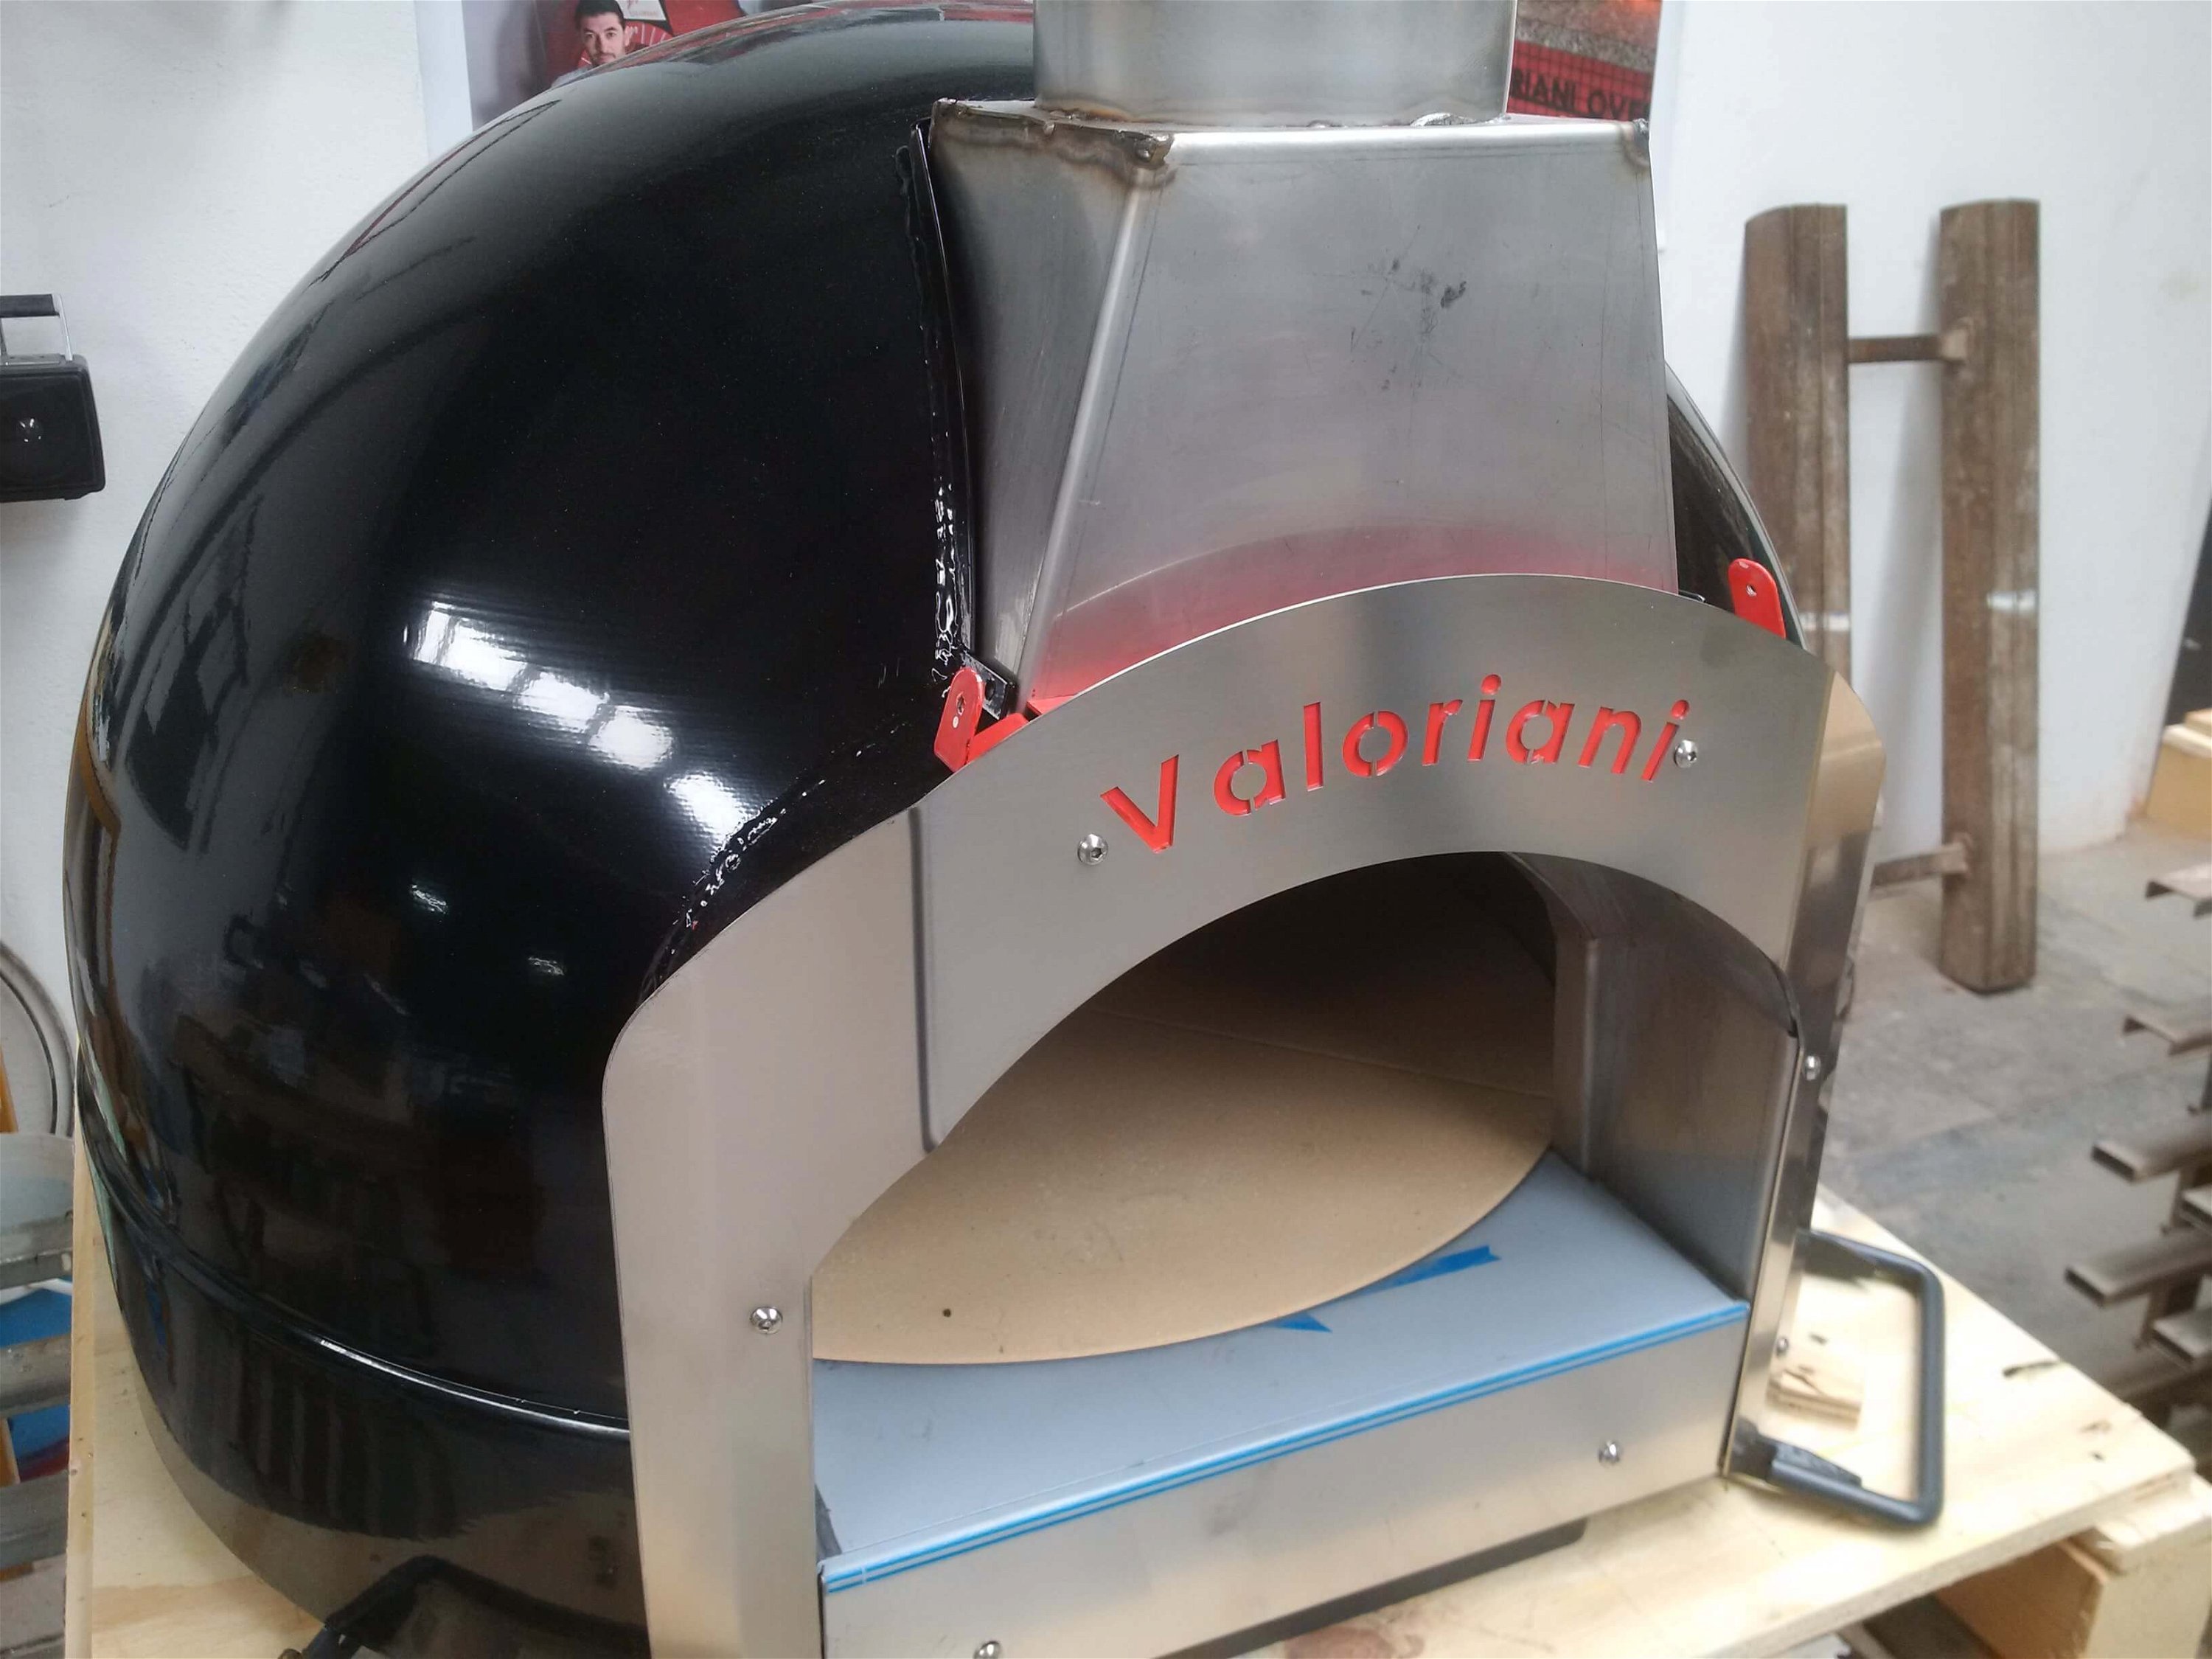 Wood oven Valoriani Baby, 60cm diameter, incl. 1. base, red